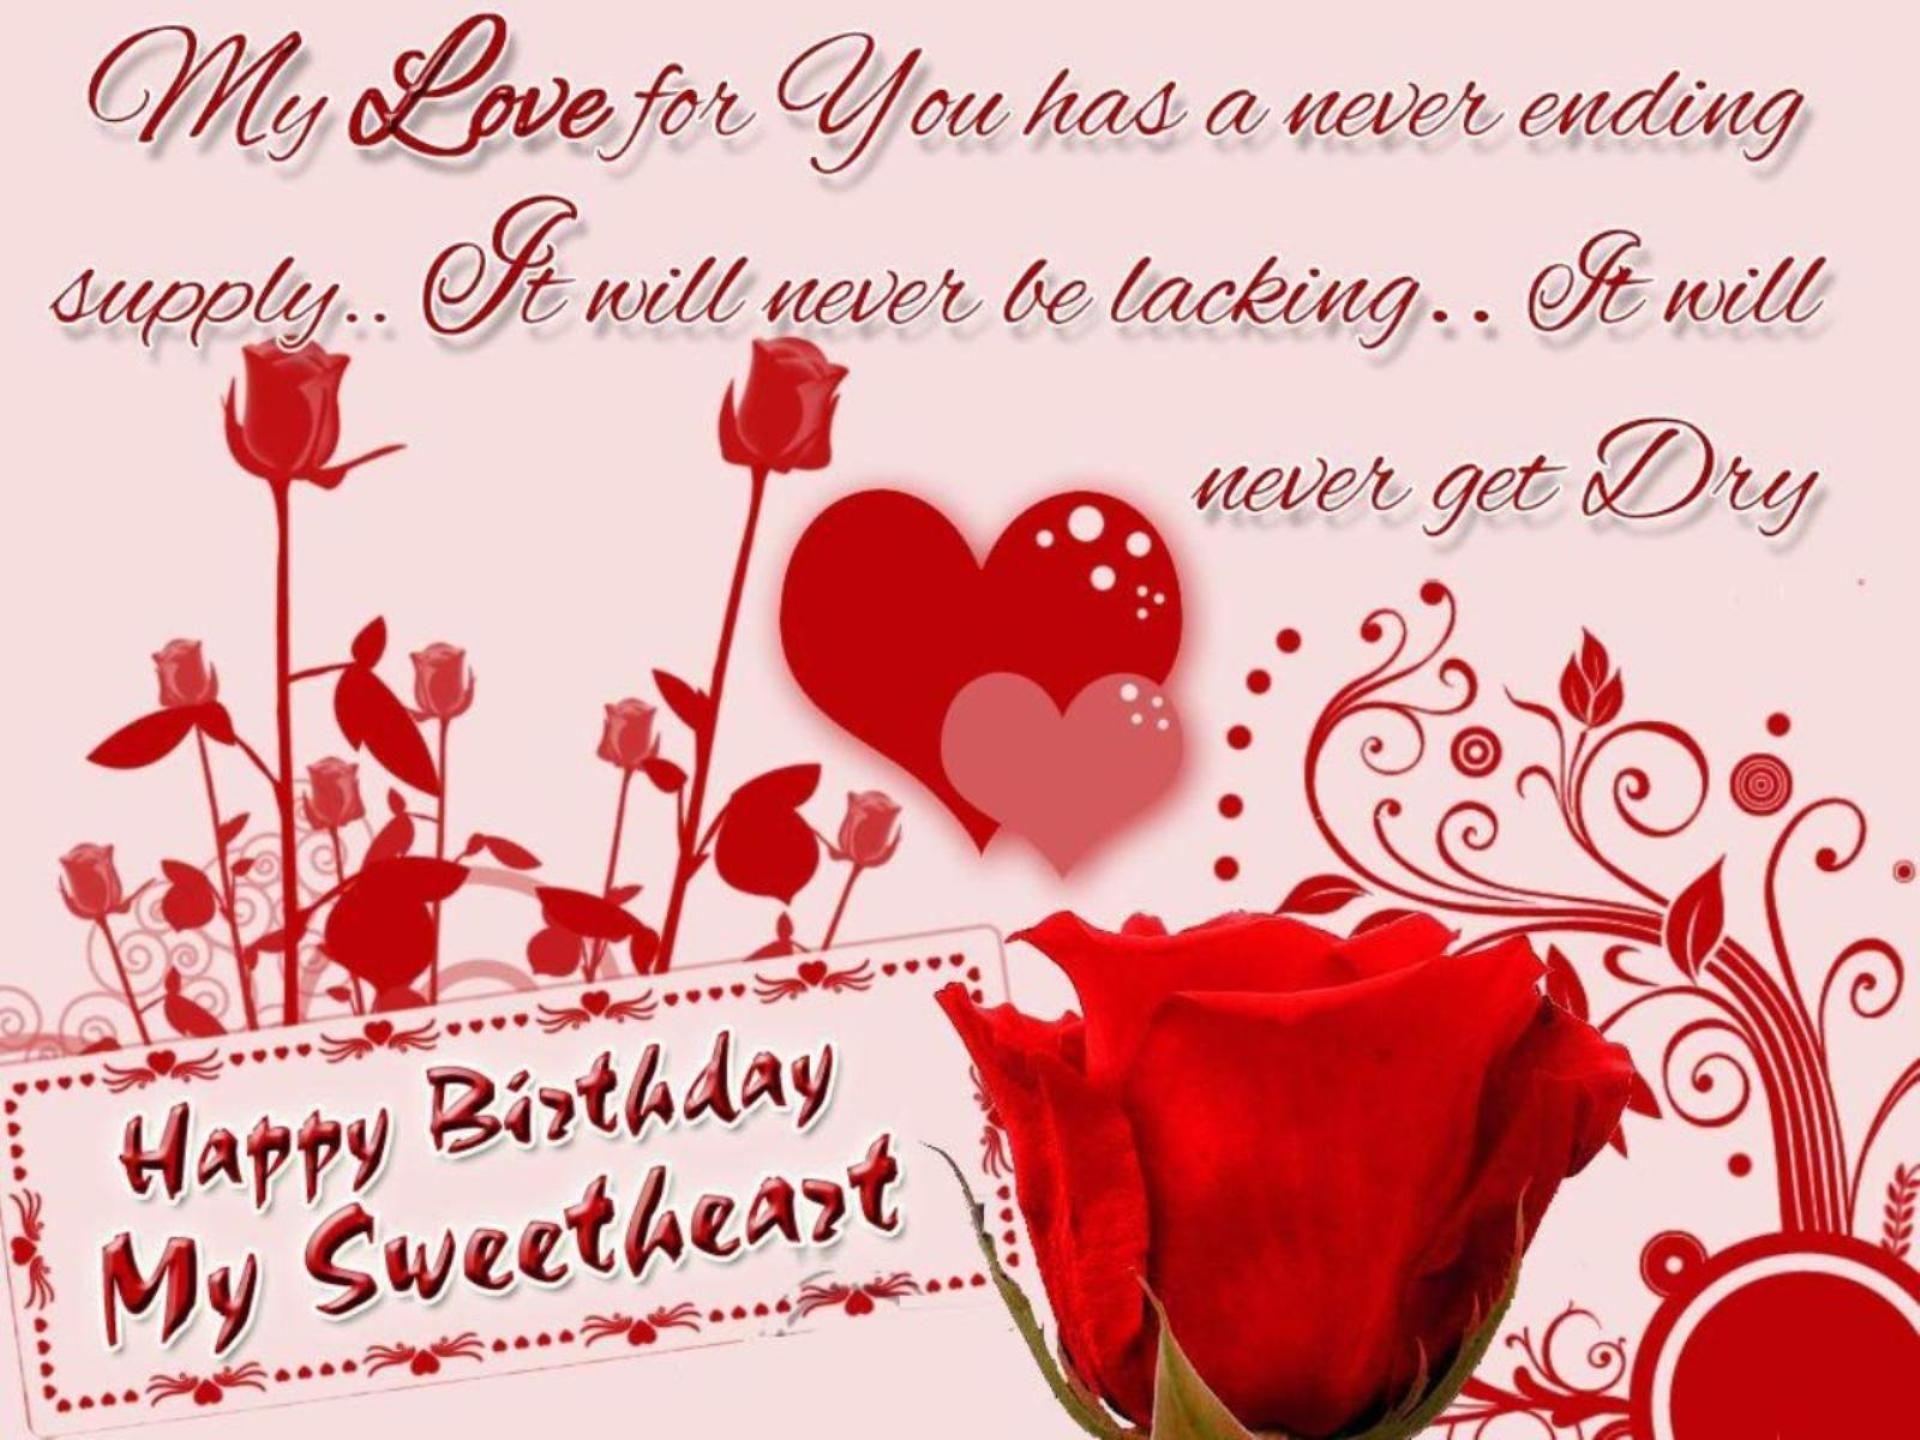 valentine day quotes for girlfriend 50th birthday. Birthday wishes for fiance, Birthday wishes for girlfriend, Happy birthday wishes image